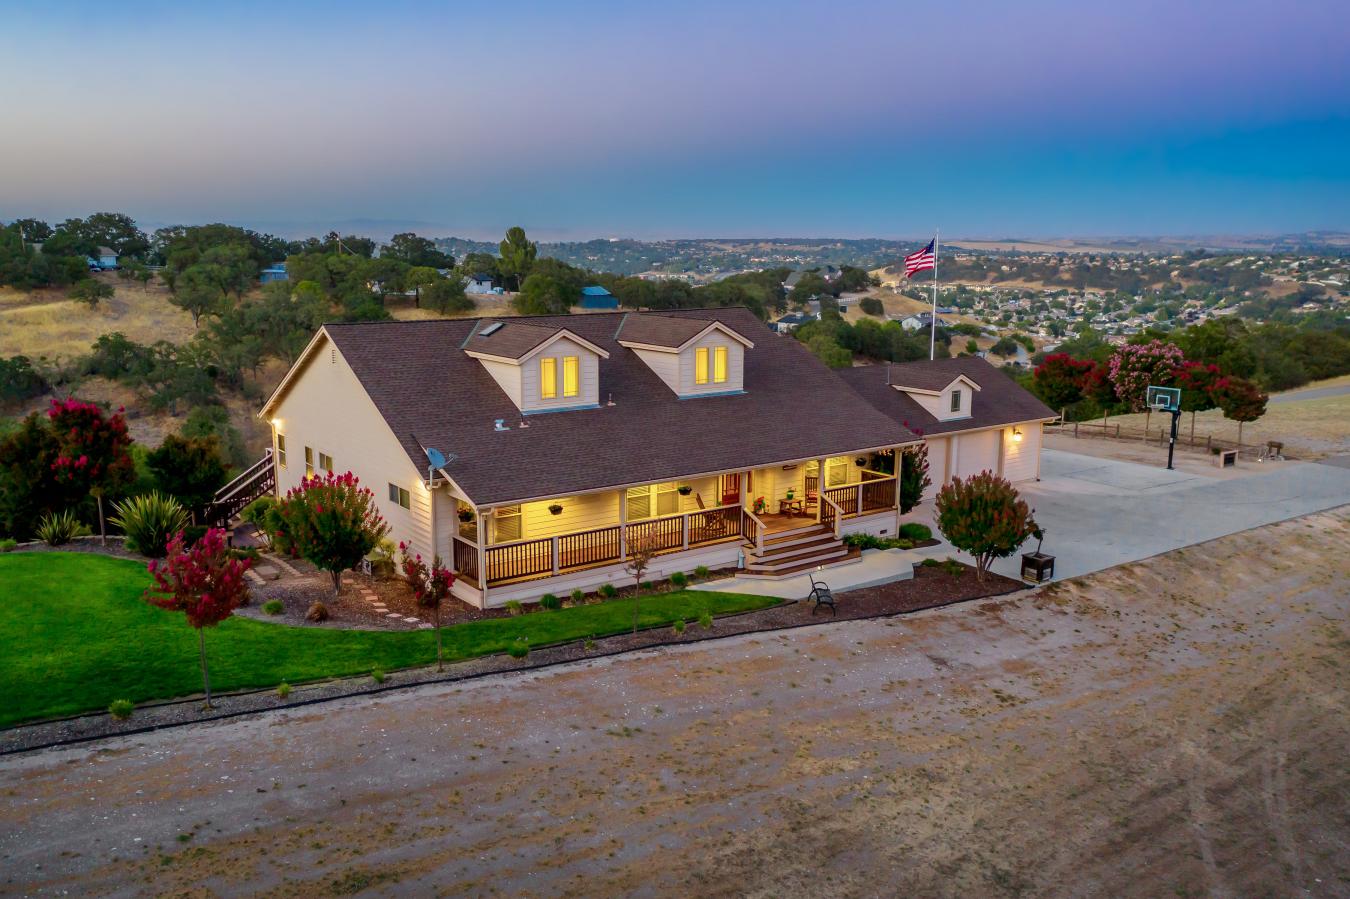 430 Robles Road, Paso Robles, California, 93446, United States, 3 Bedrooms Bedrooms, ,3 BathroomsBathrooms,Residential,For Sale,430 Robles Road,794368